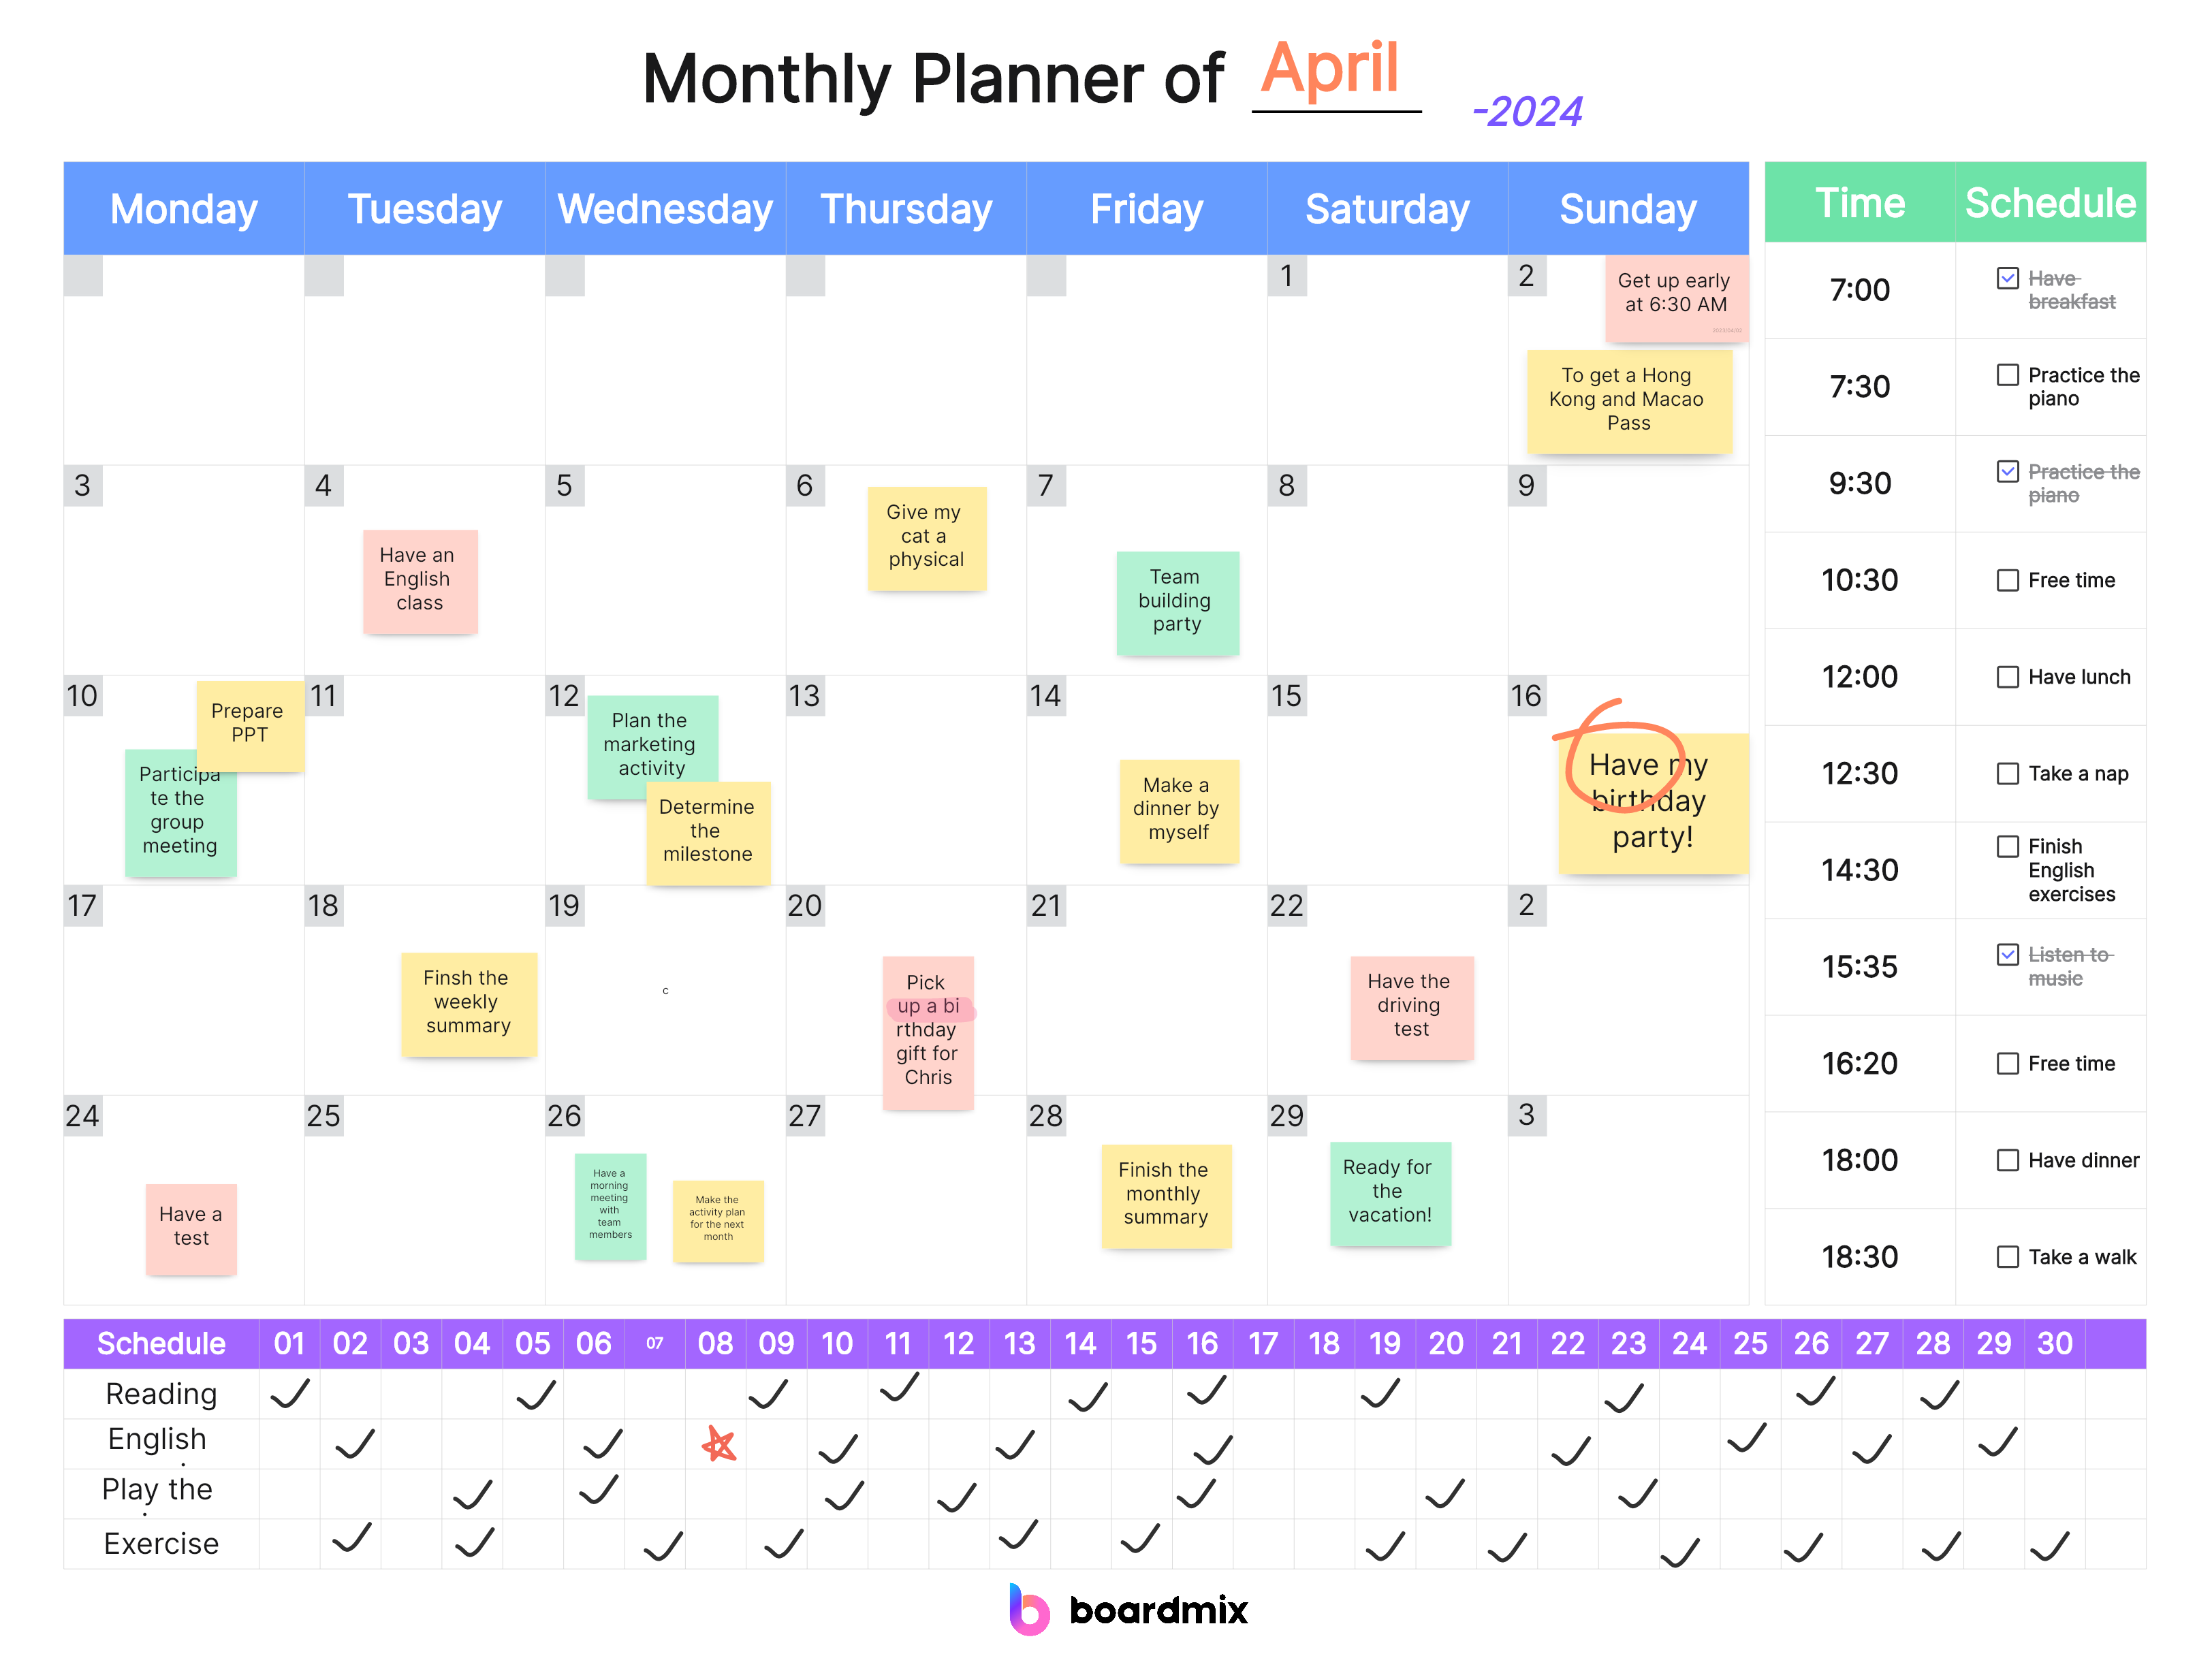 Customize Your Monthly Planner for 2024 Online